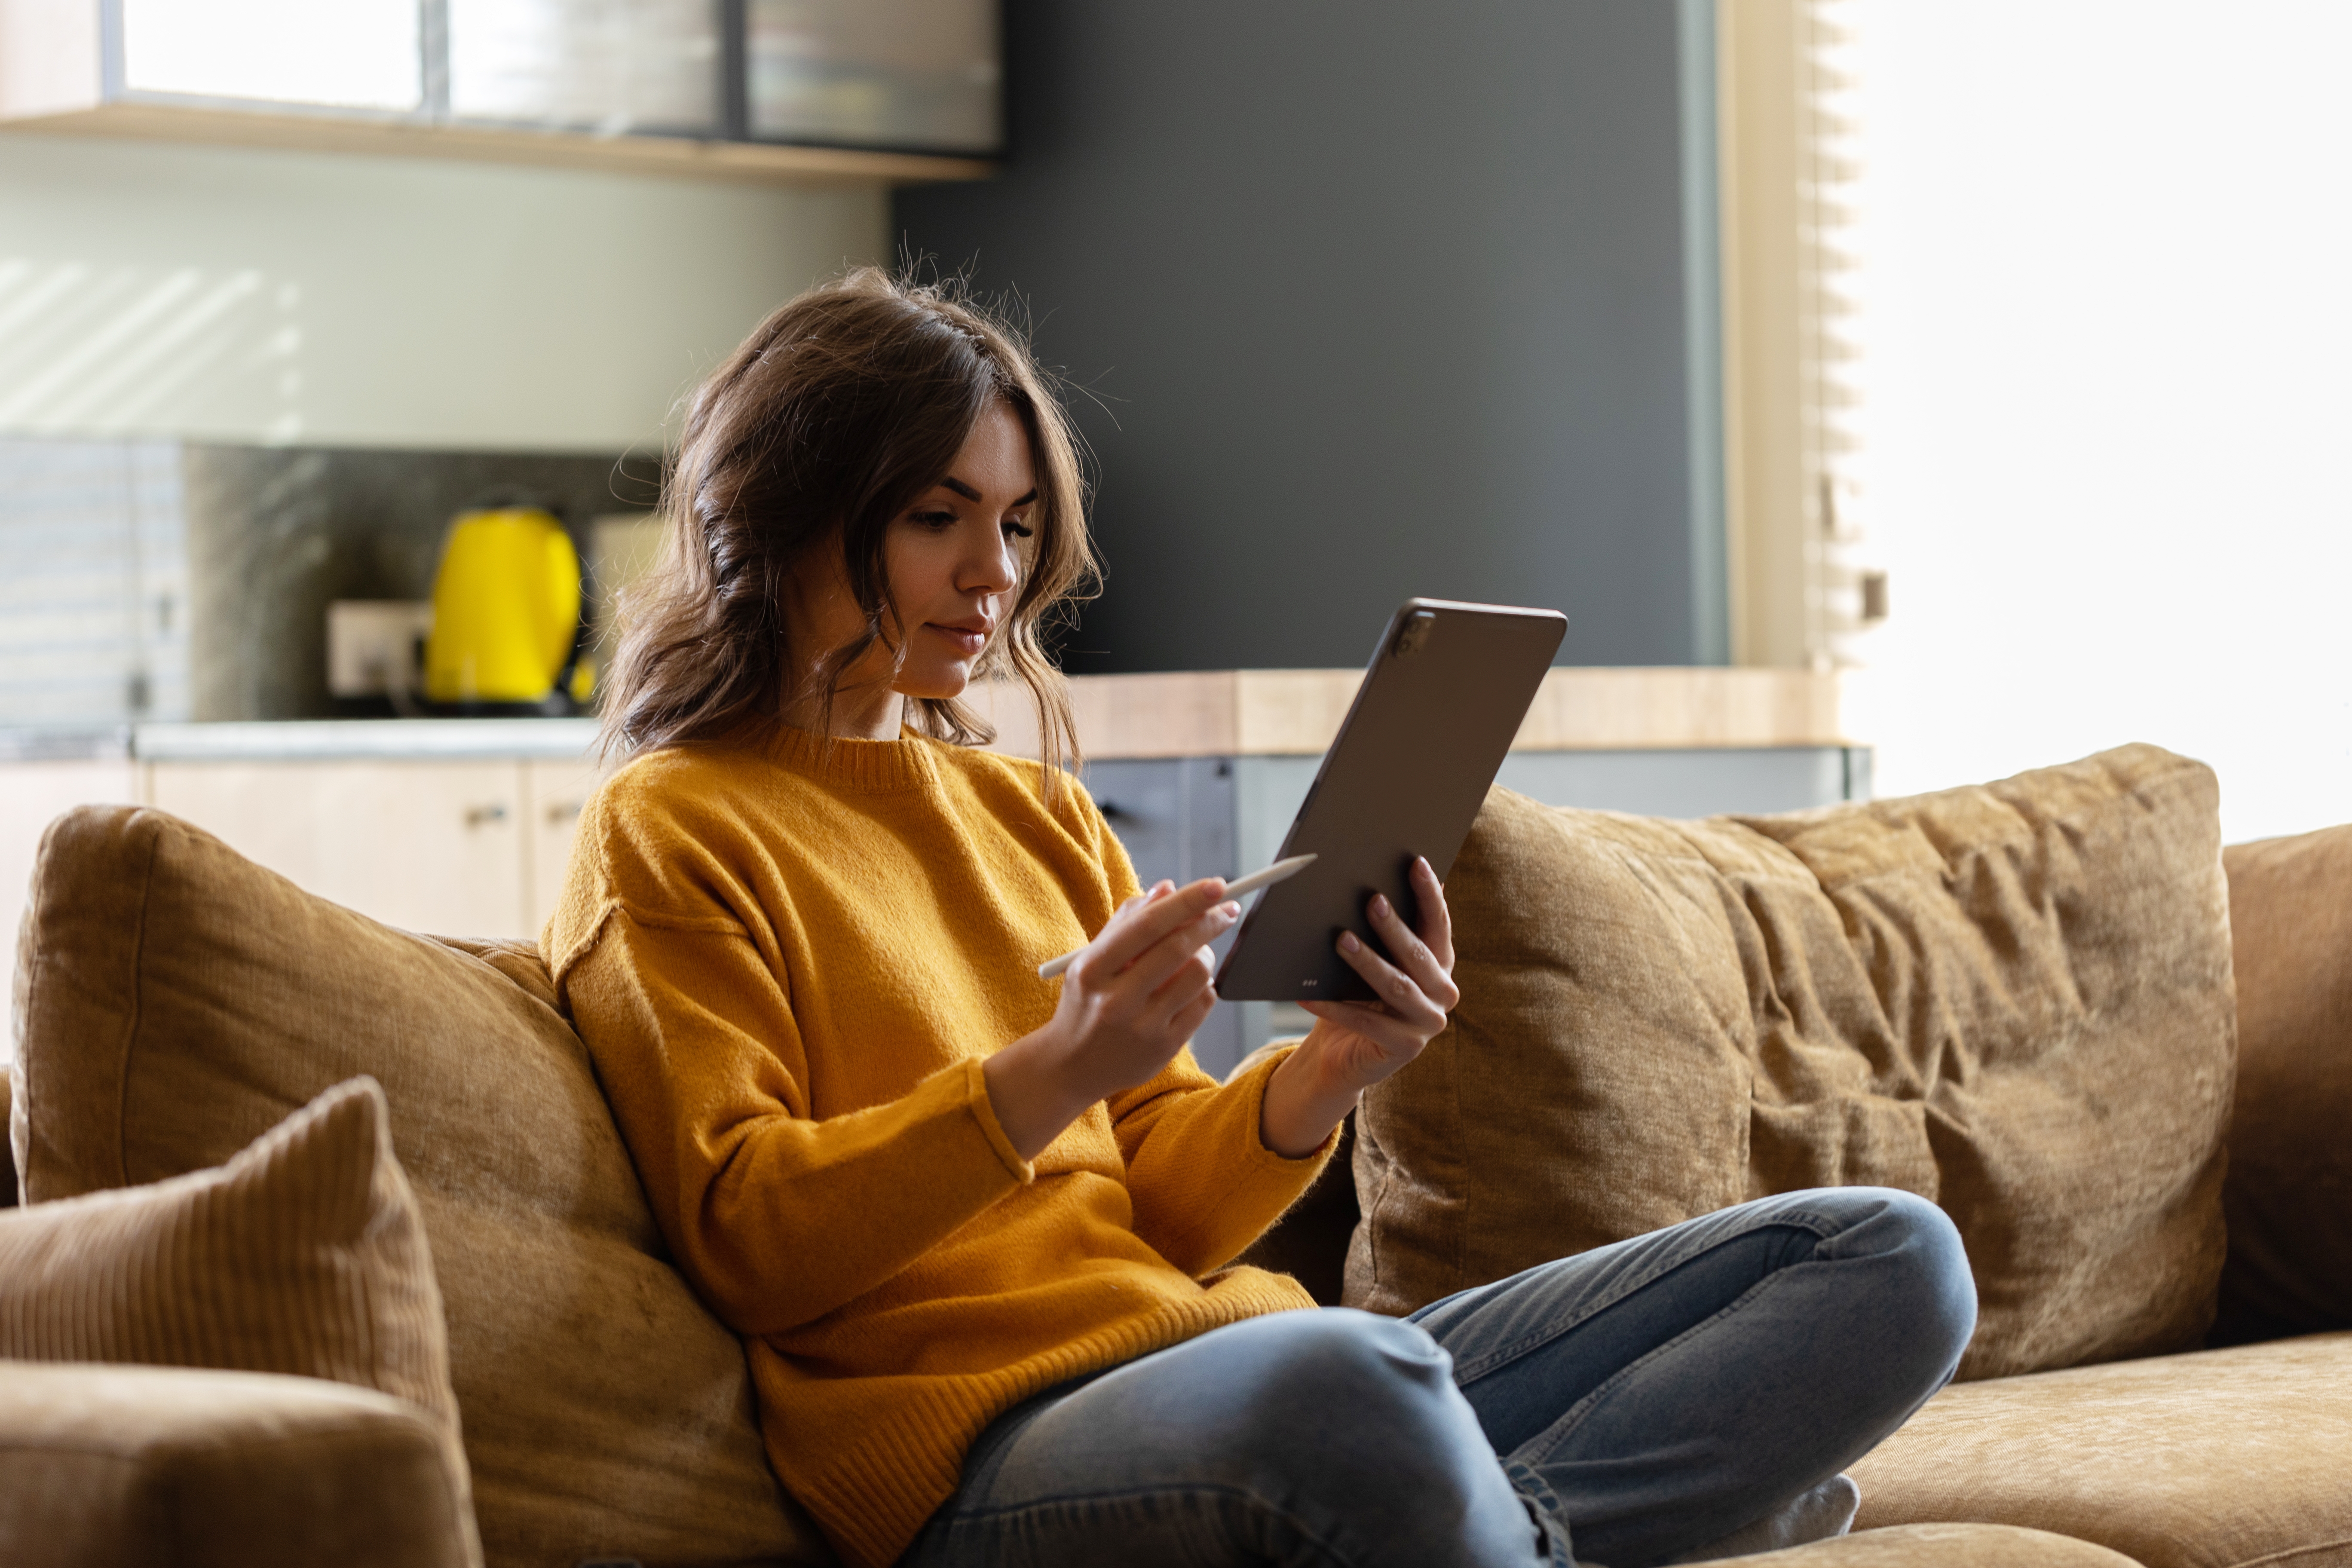 Woman sitting on couch using Apple iPad